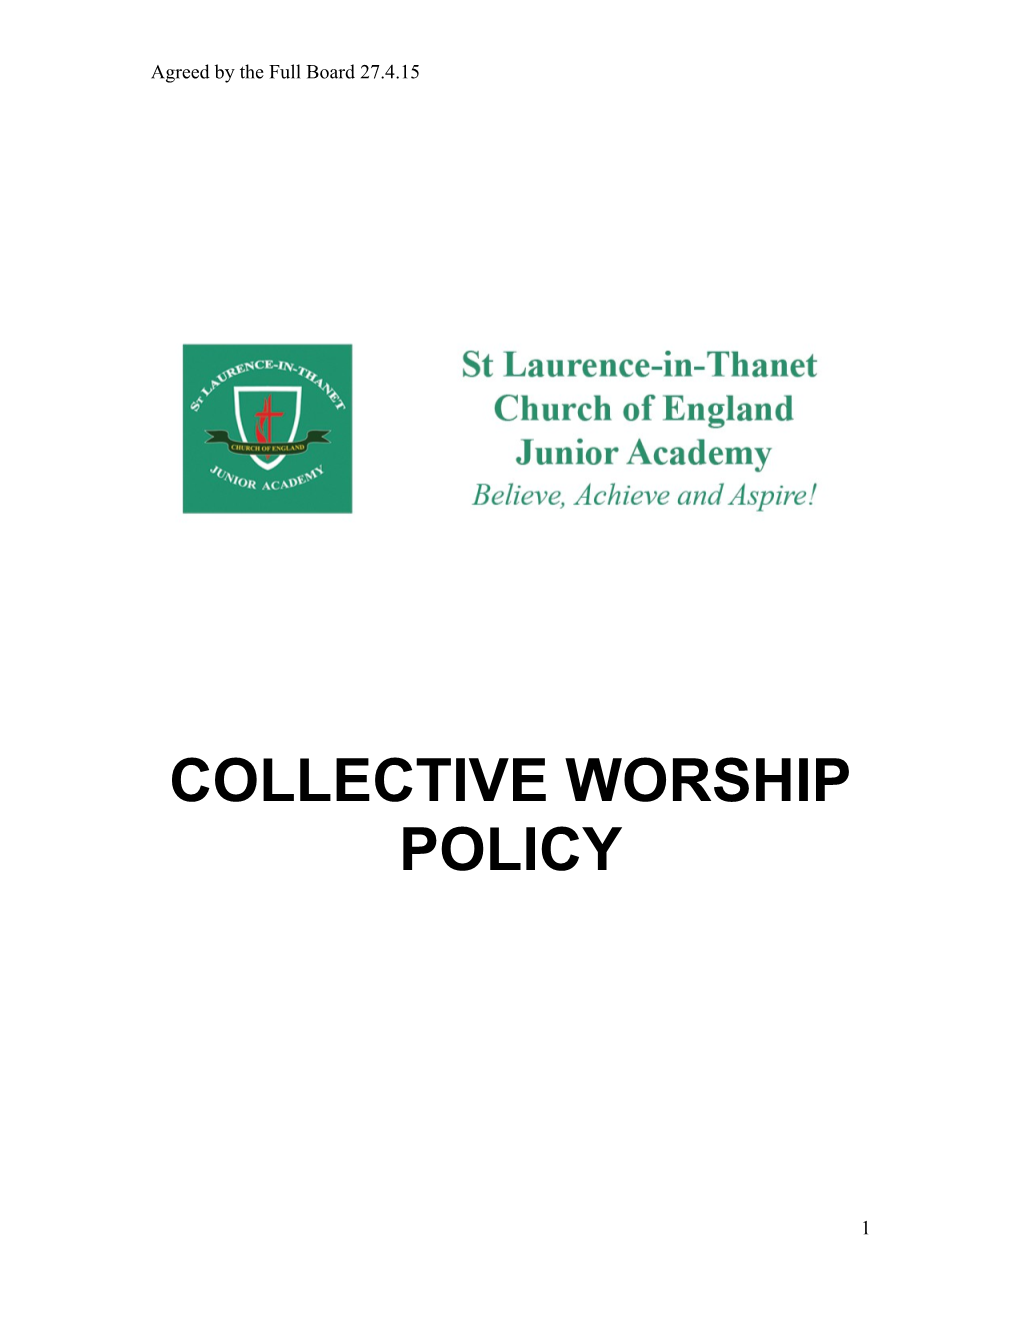 Collective Worship Policy for a Primary School